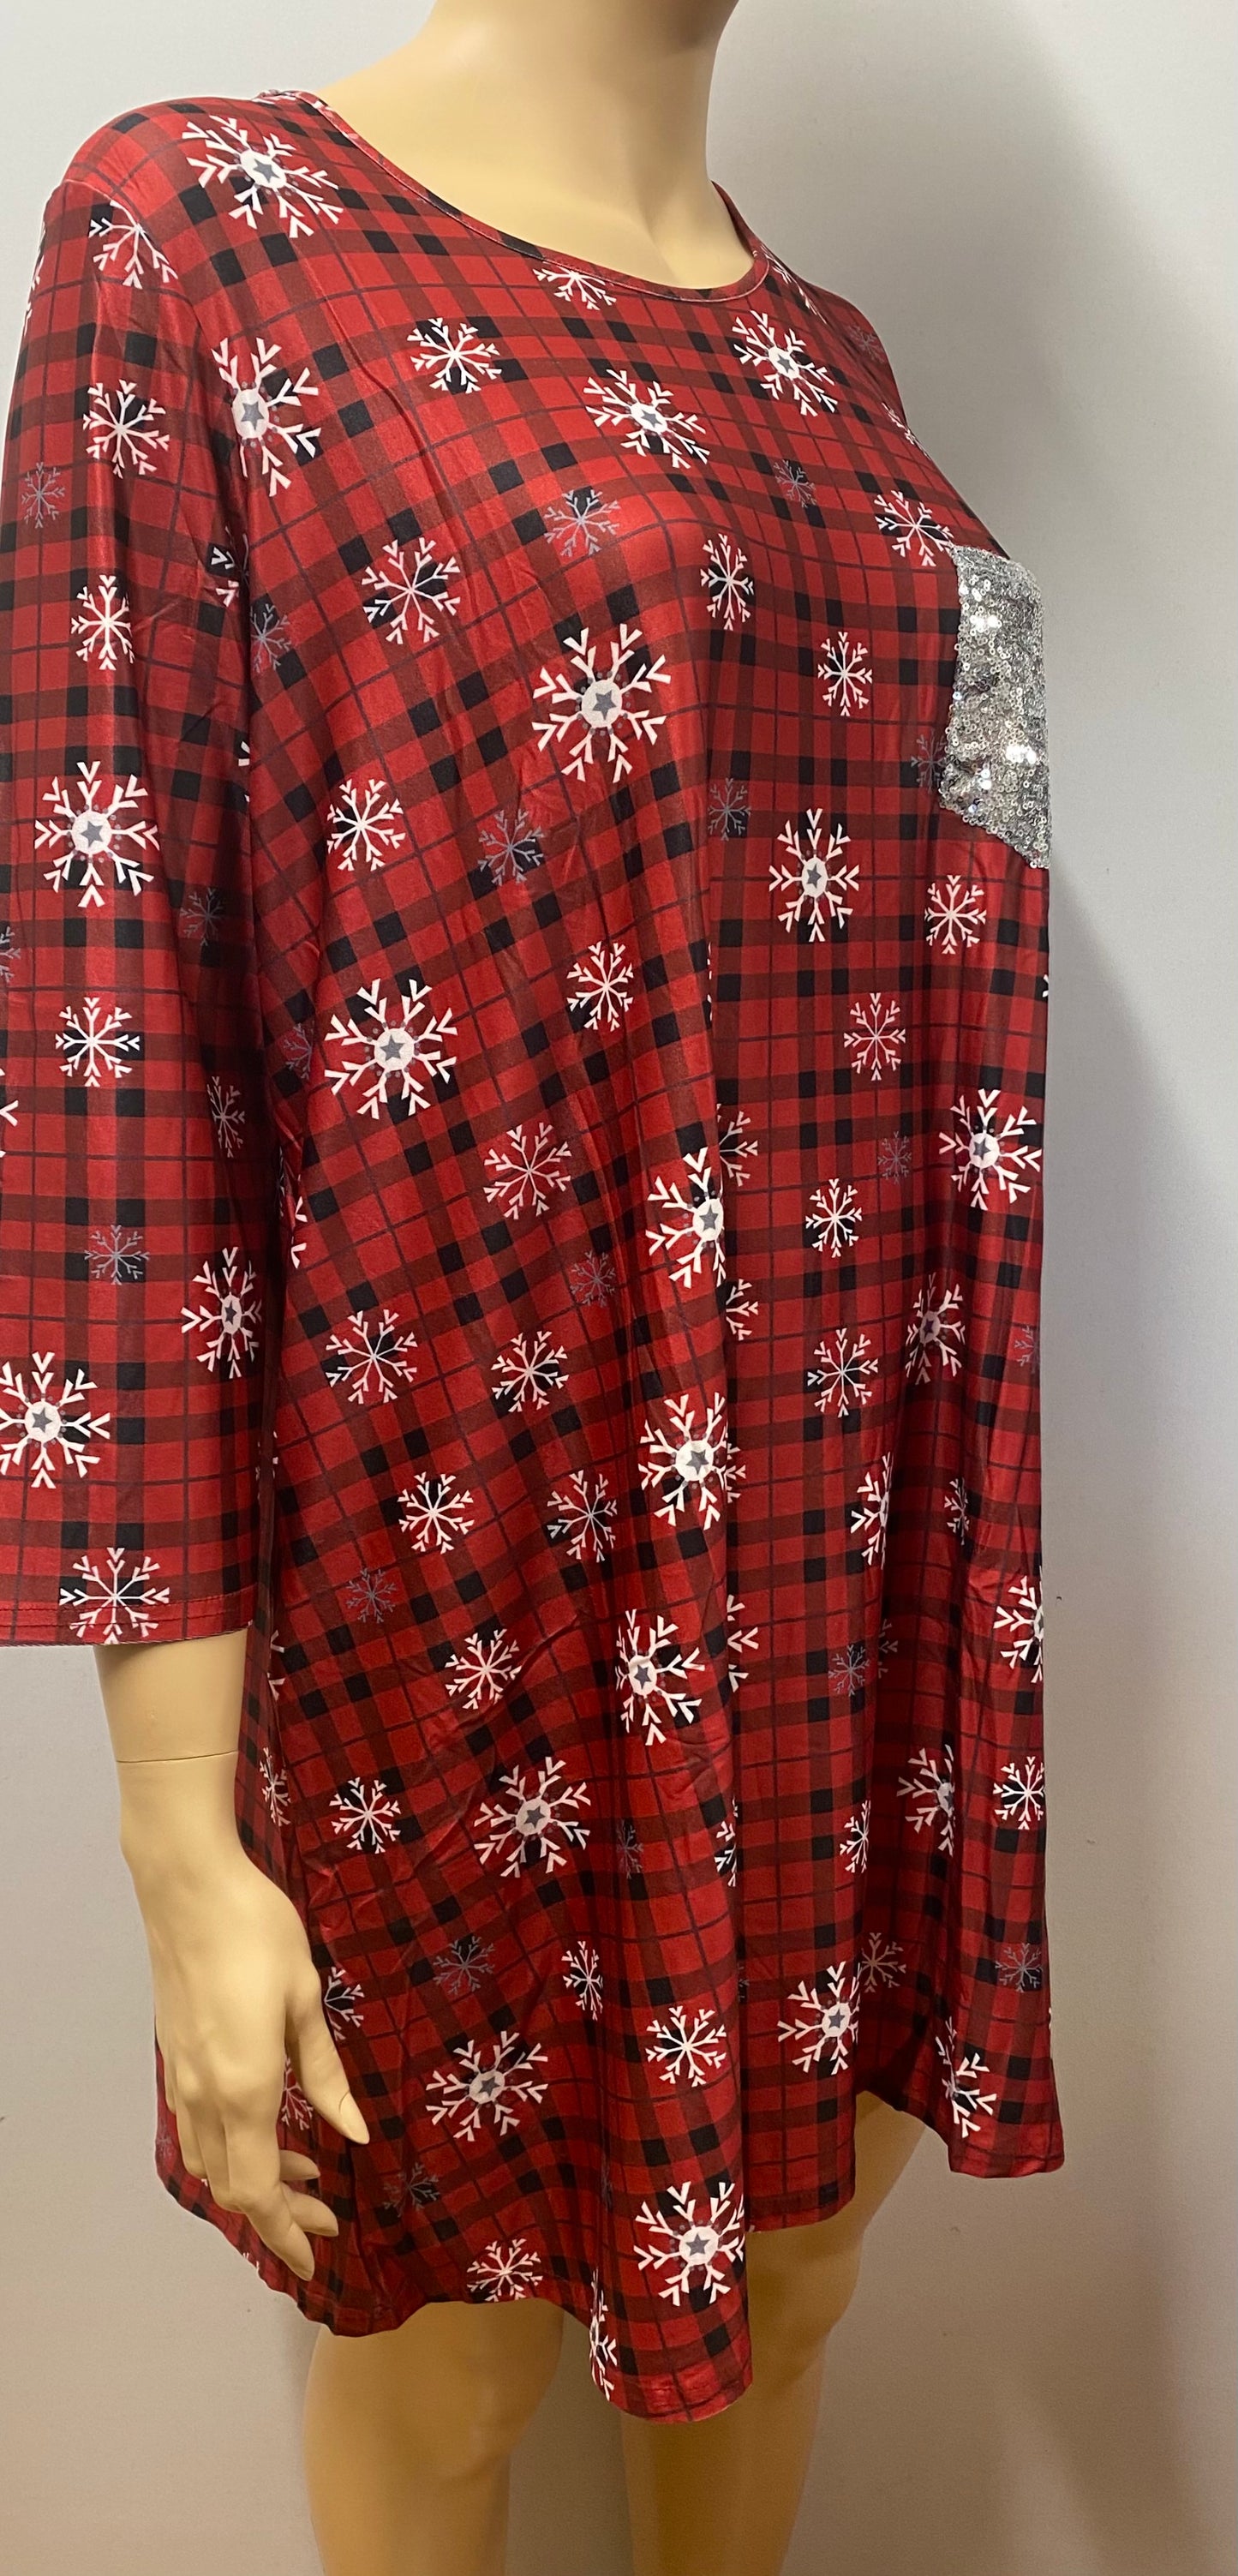 Plus Size Snowflake Dress with Sequins Pocket